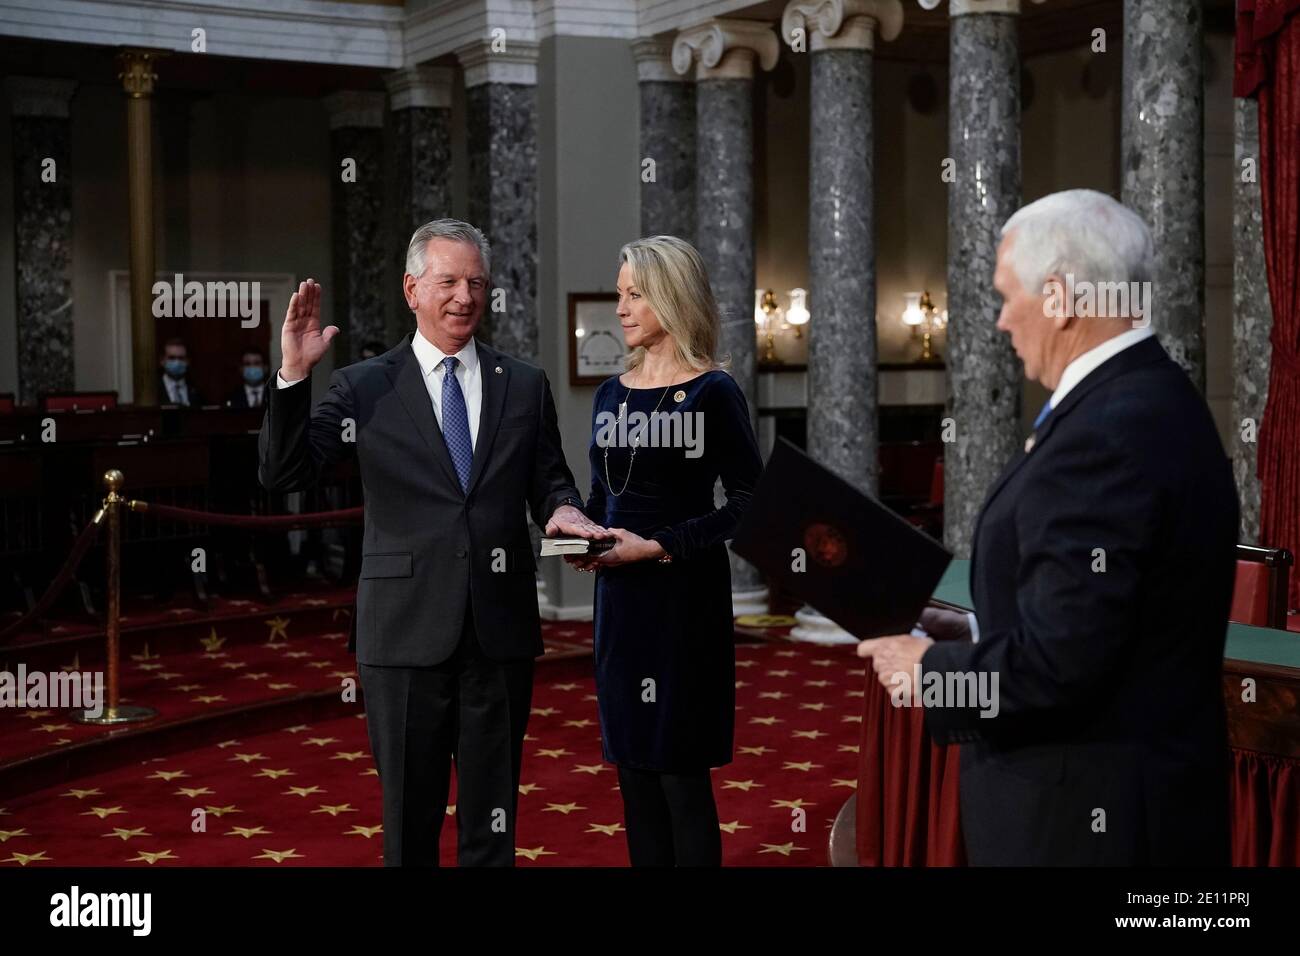 Washington, USA. 03rd Jan, 2021. Sen. Tommy Tuberville, R-Ala., the former Auburn University football coach, is joined by his wife Suzanne Tuberville, as he takes the oath of office from Vice President Mike Pence during a reenactment ceremony in the Old Senate Chamber at the Capitol in Washington, Sunday, Jan. 3, 2021. (Photo by J. Scott Applewhite/Pool/Sipa USA) Credit: Sipa USA/Alamy Live News Stock Photo